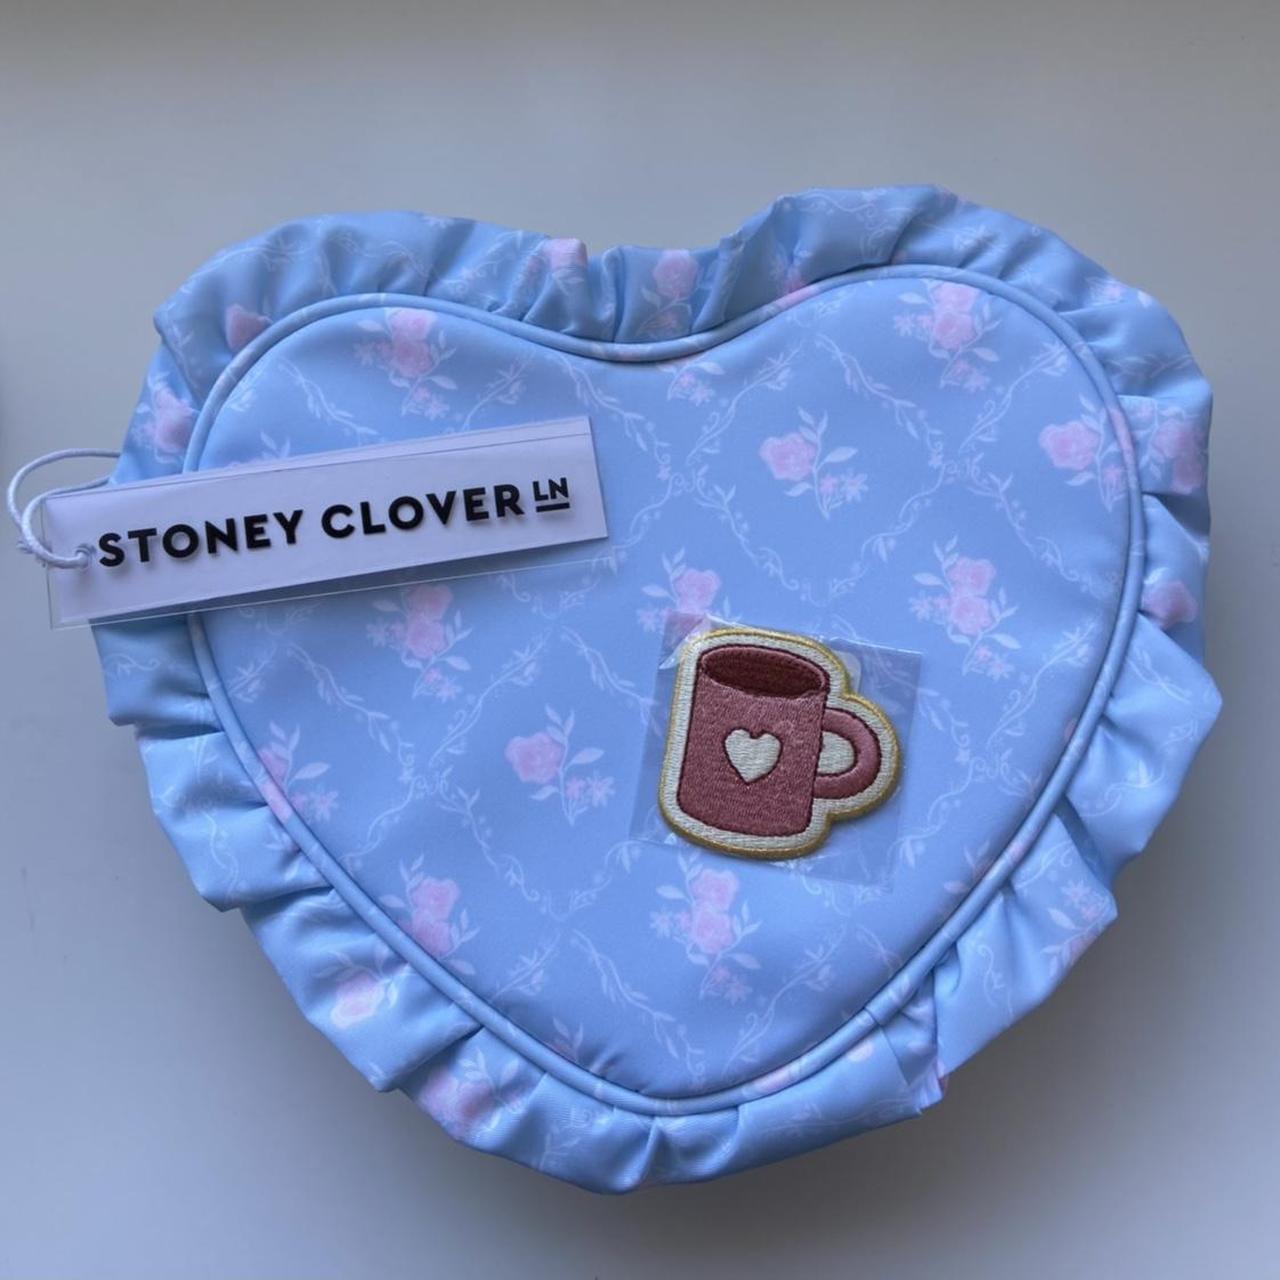 Stoney clover lane heart pouch + 1 patch New, with - Depop